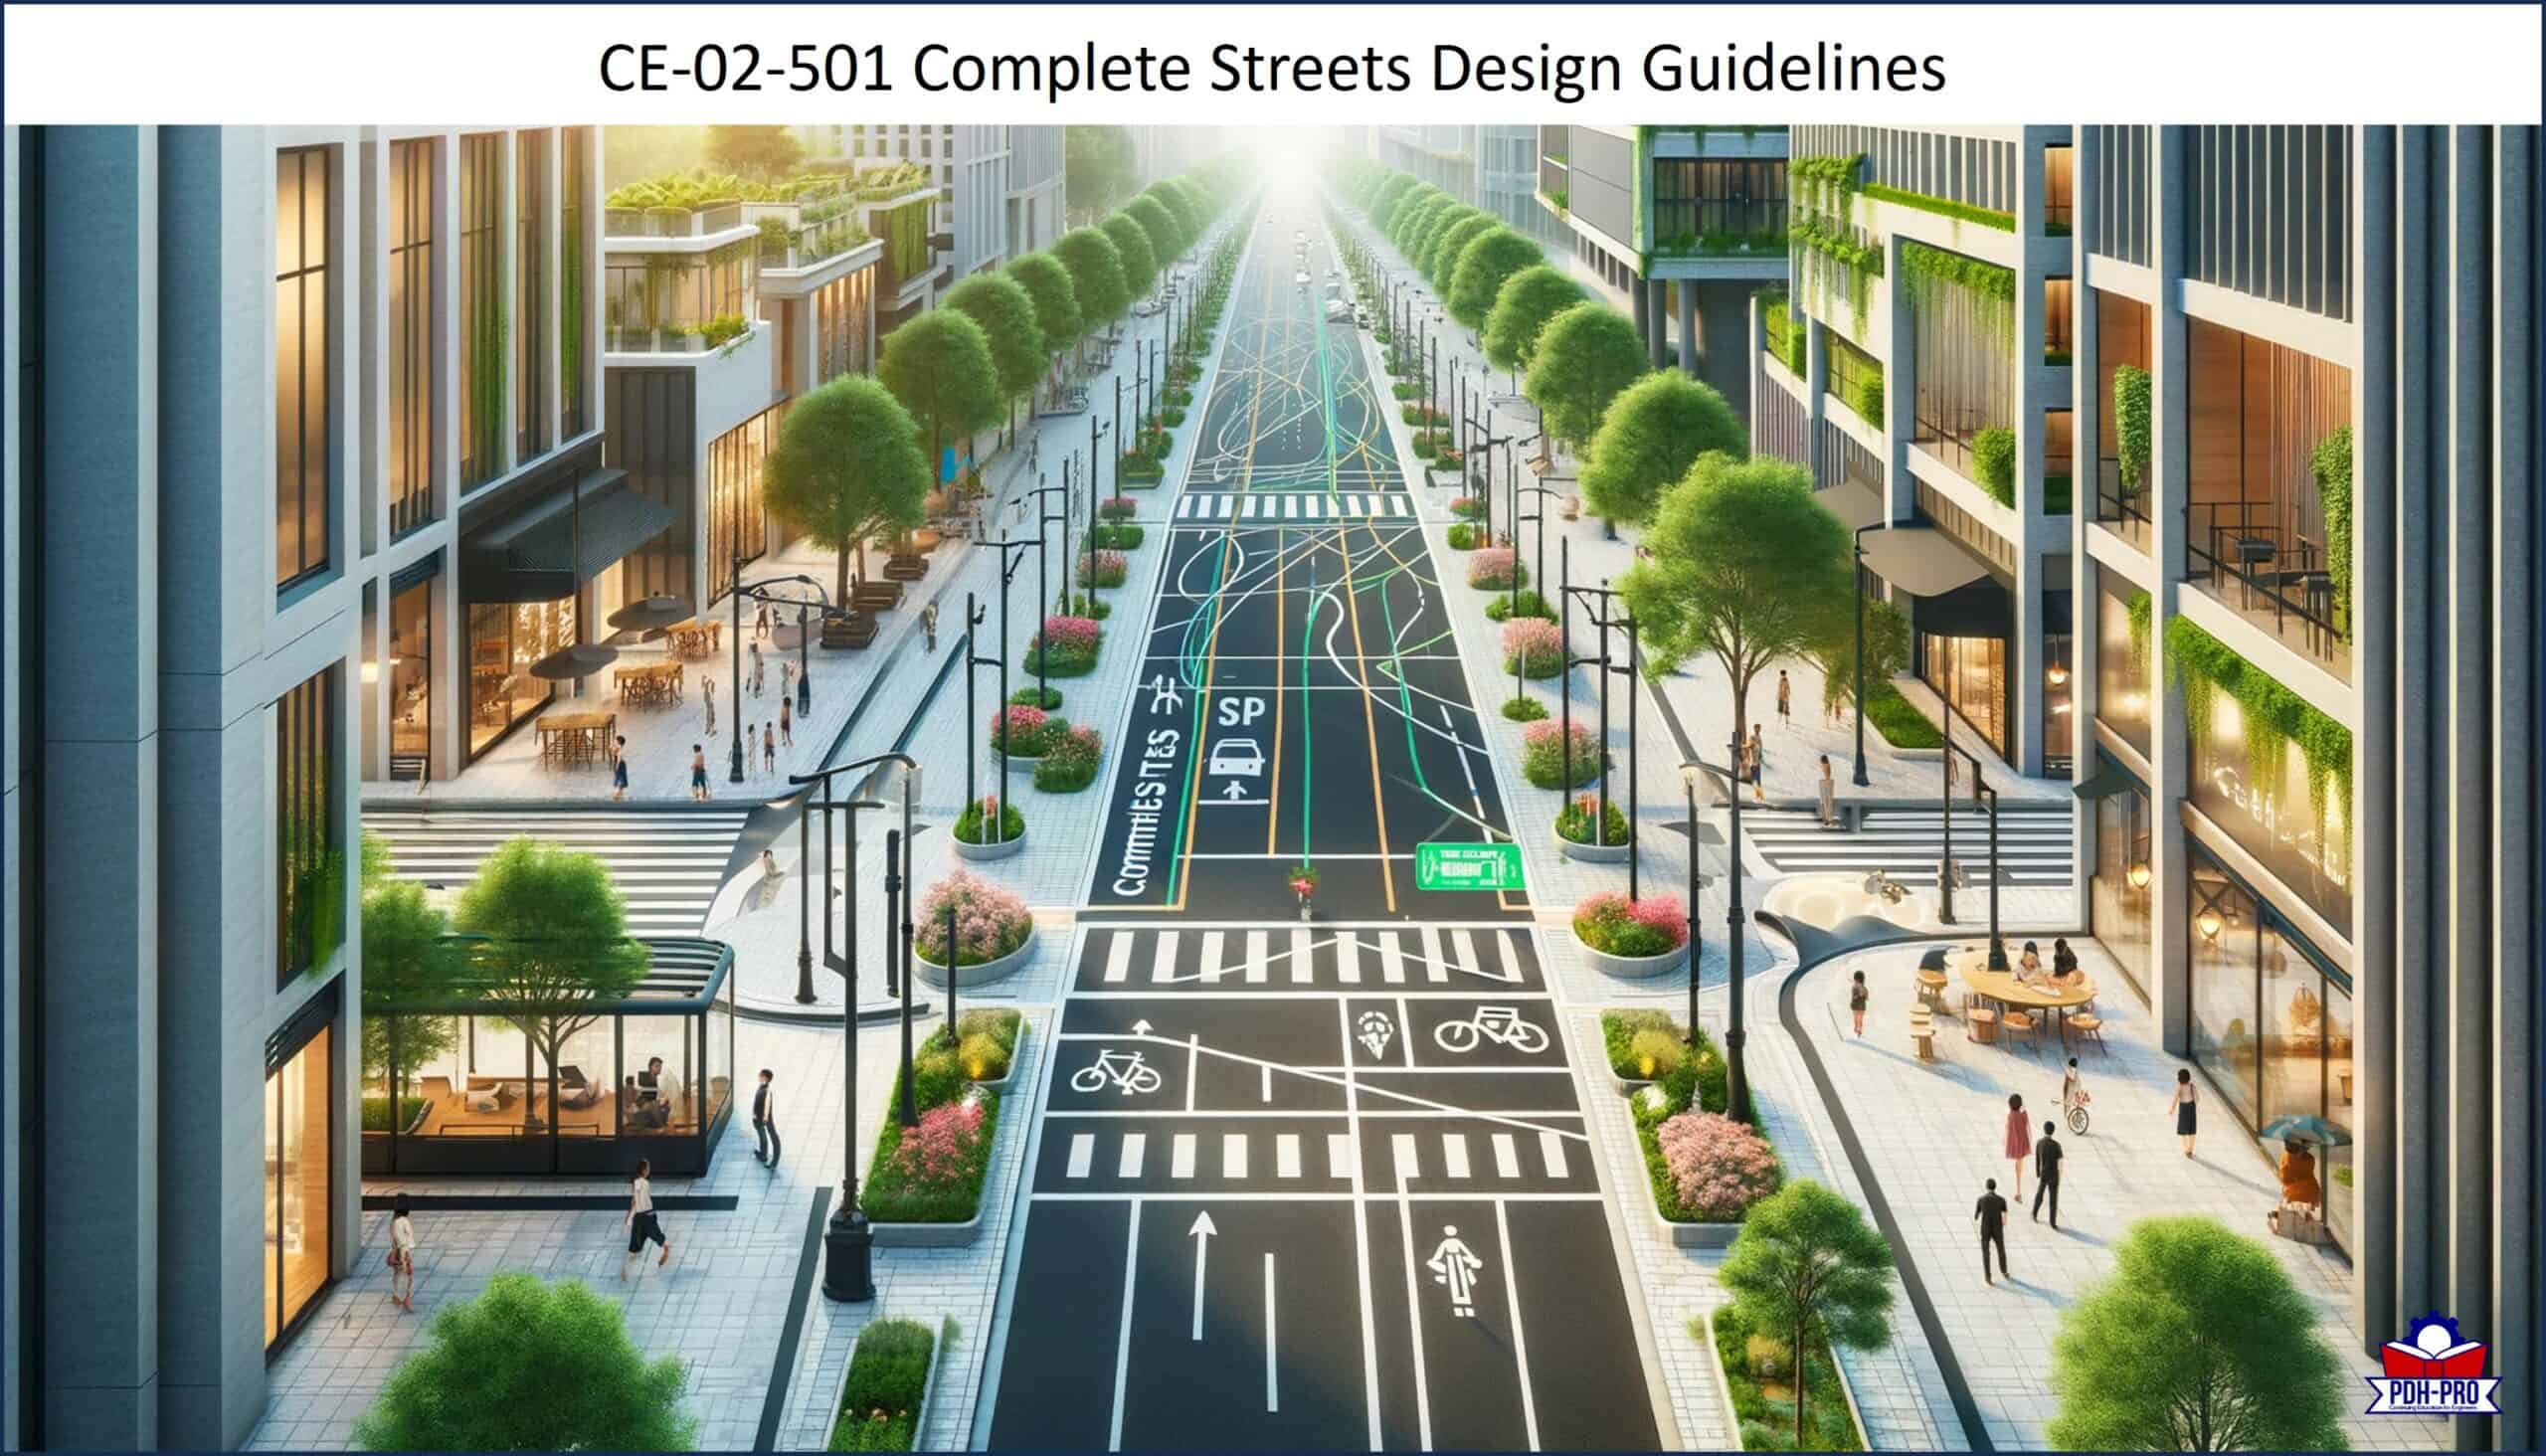 Complete Streets Design Guidelines